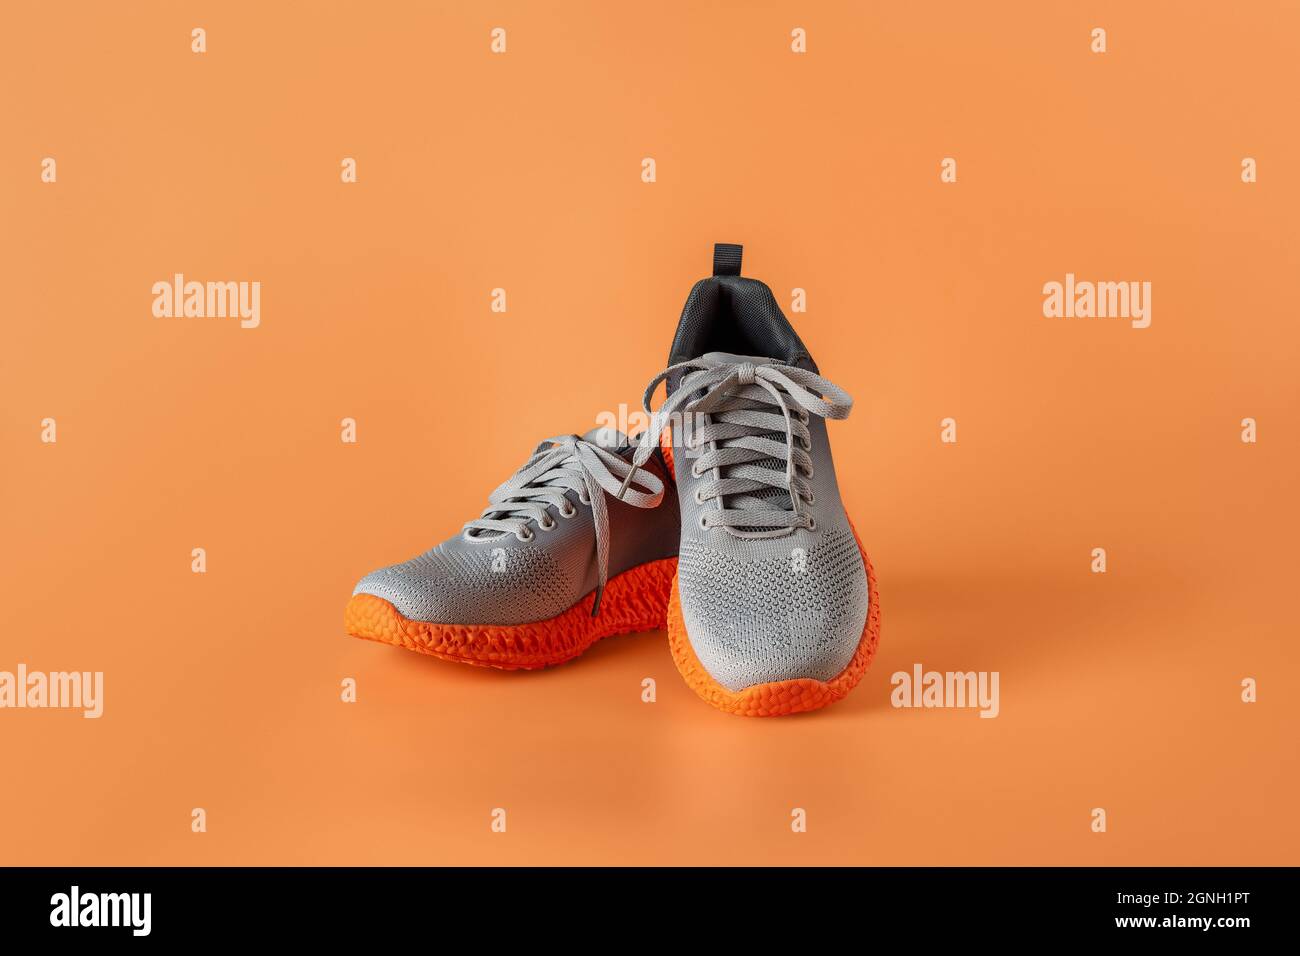 Pair of grooved orange sole sneakers from gray mesh fabric over orange  background. Laced up stylish textile trainers for active lifestyle, fitness  Stock Photo - Alamy